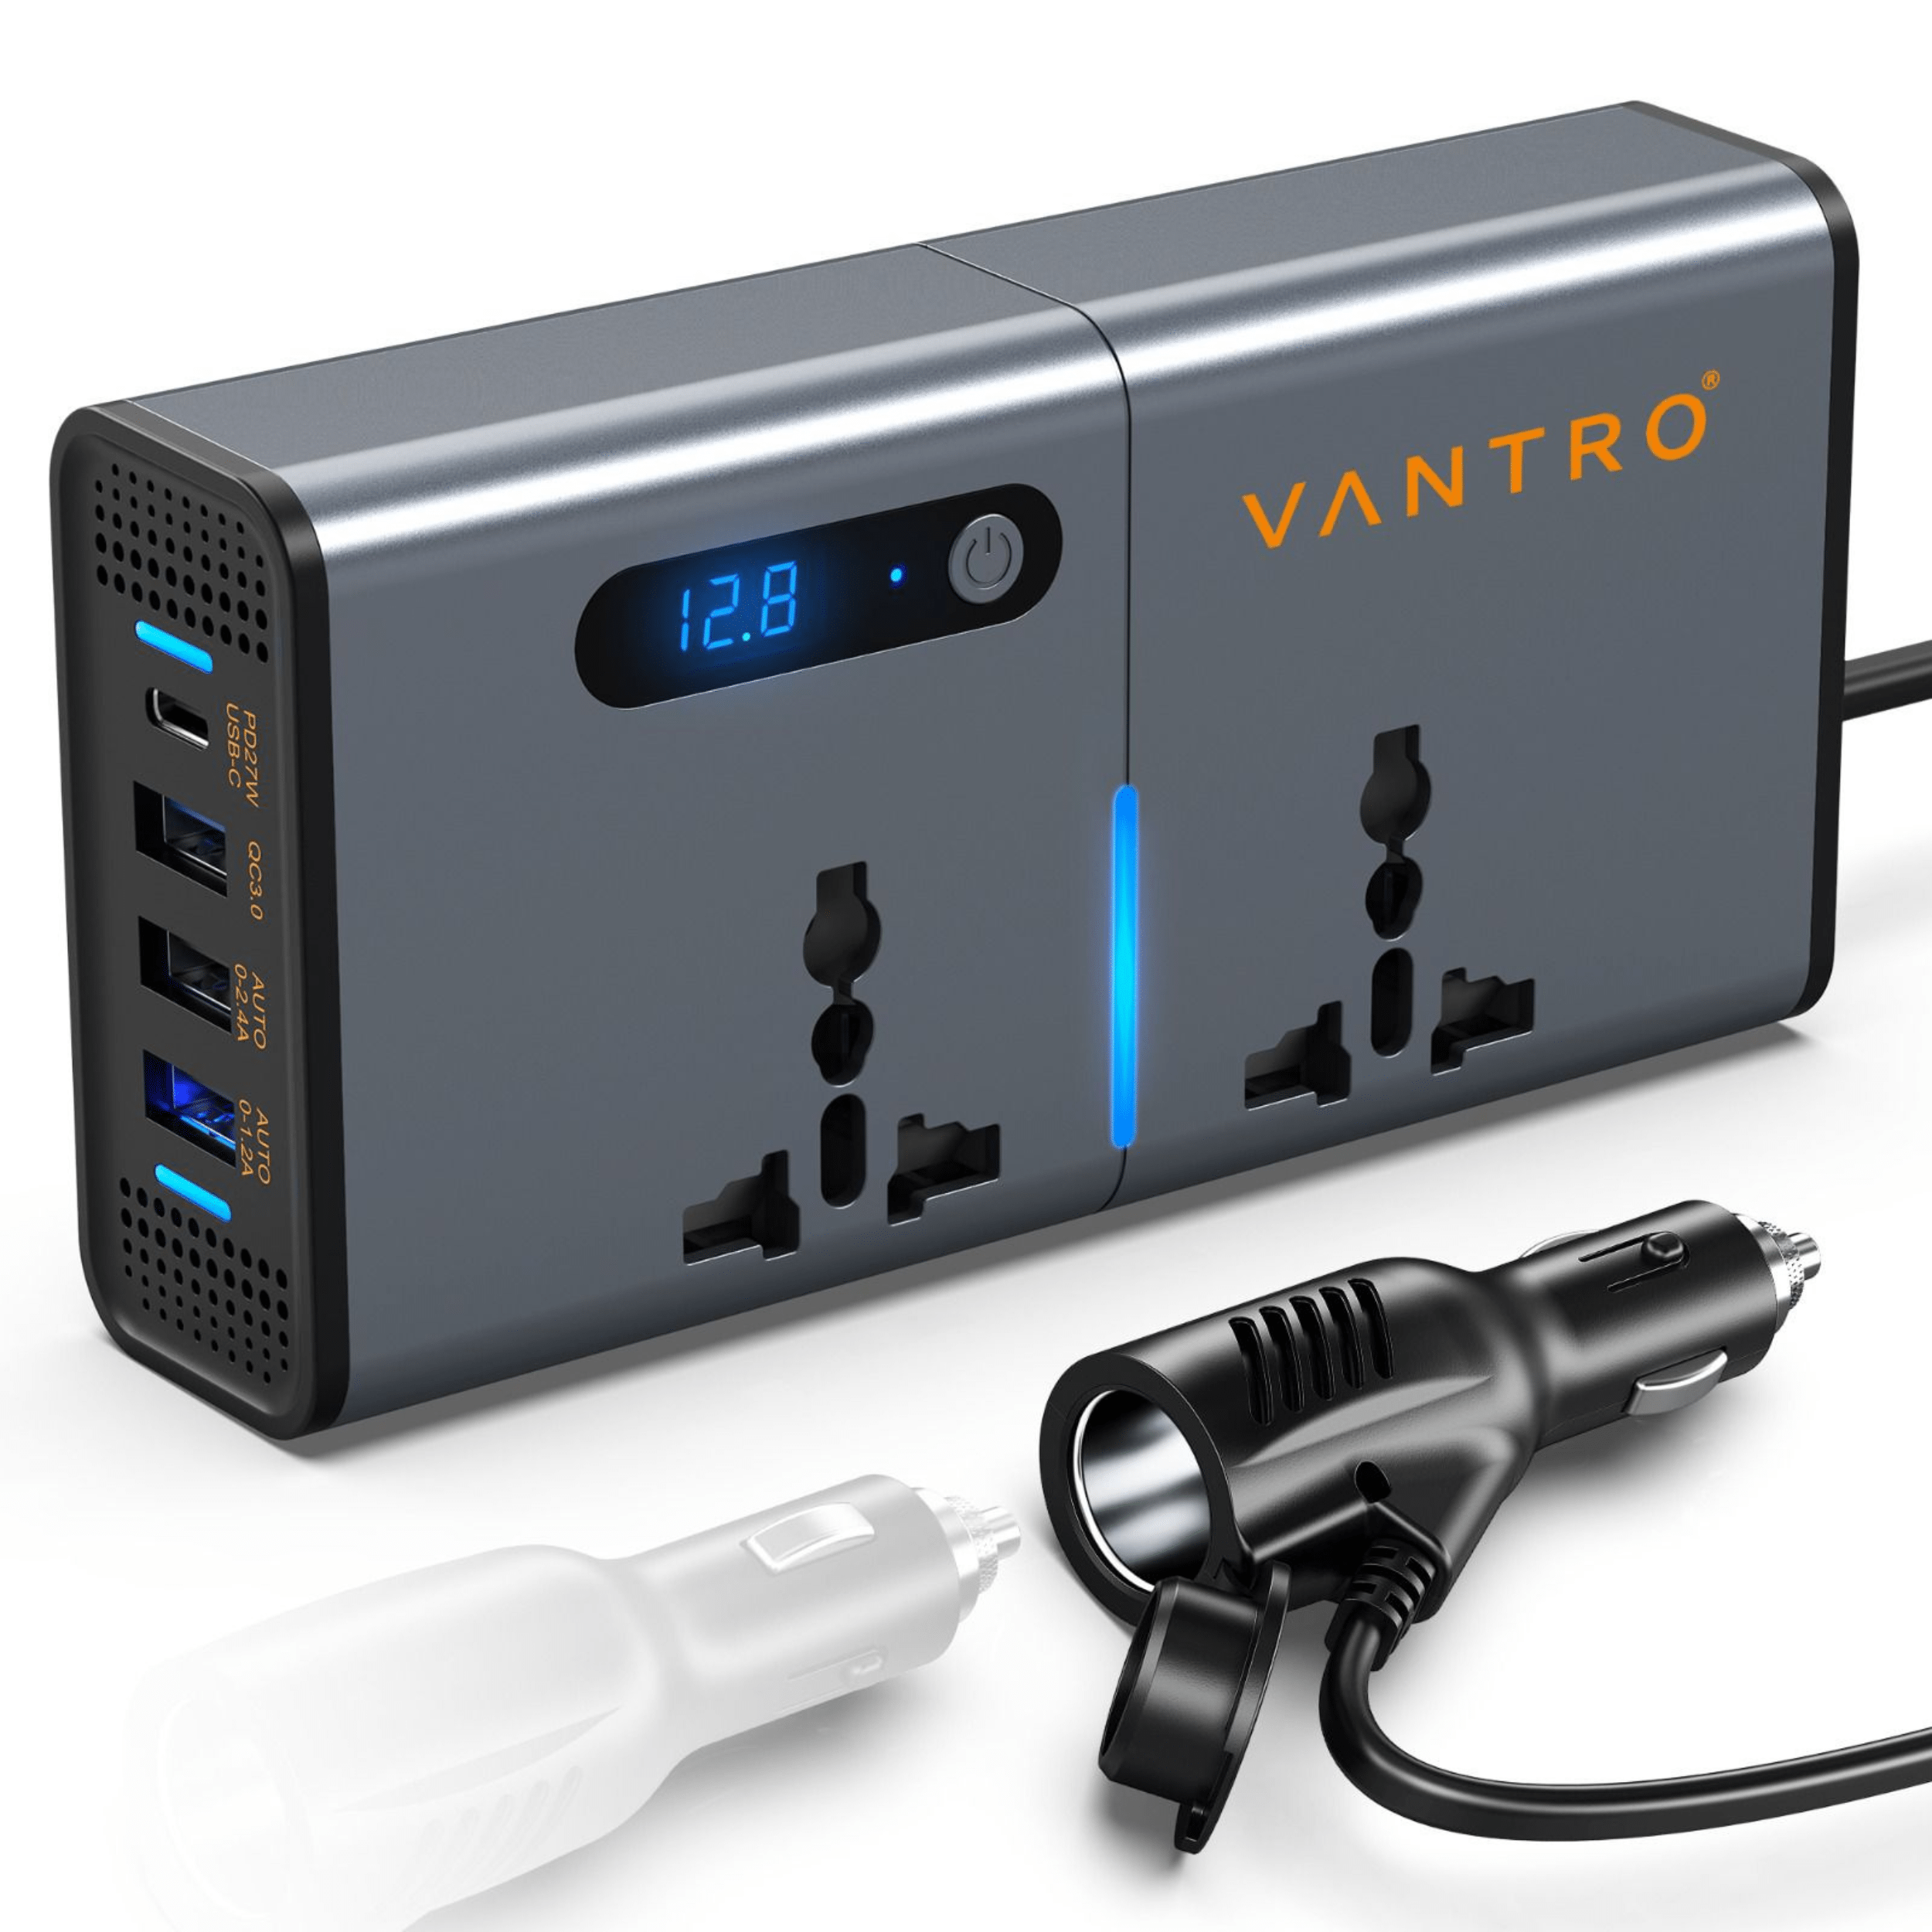 Vantro 200W Car Power Inverter Newly Car Plug Adapter Outlet